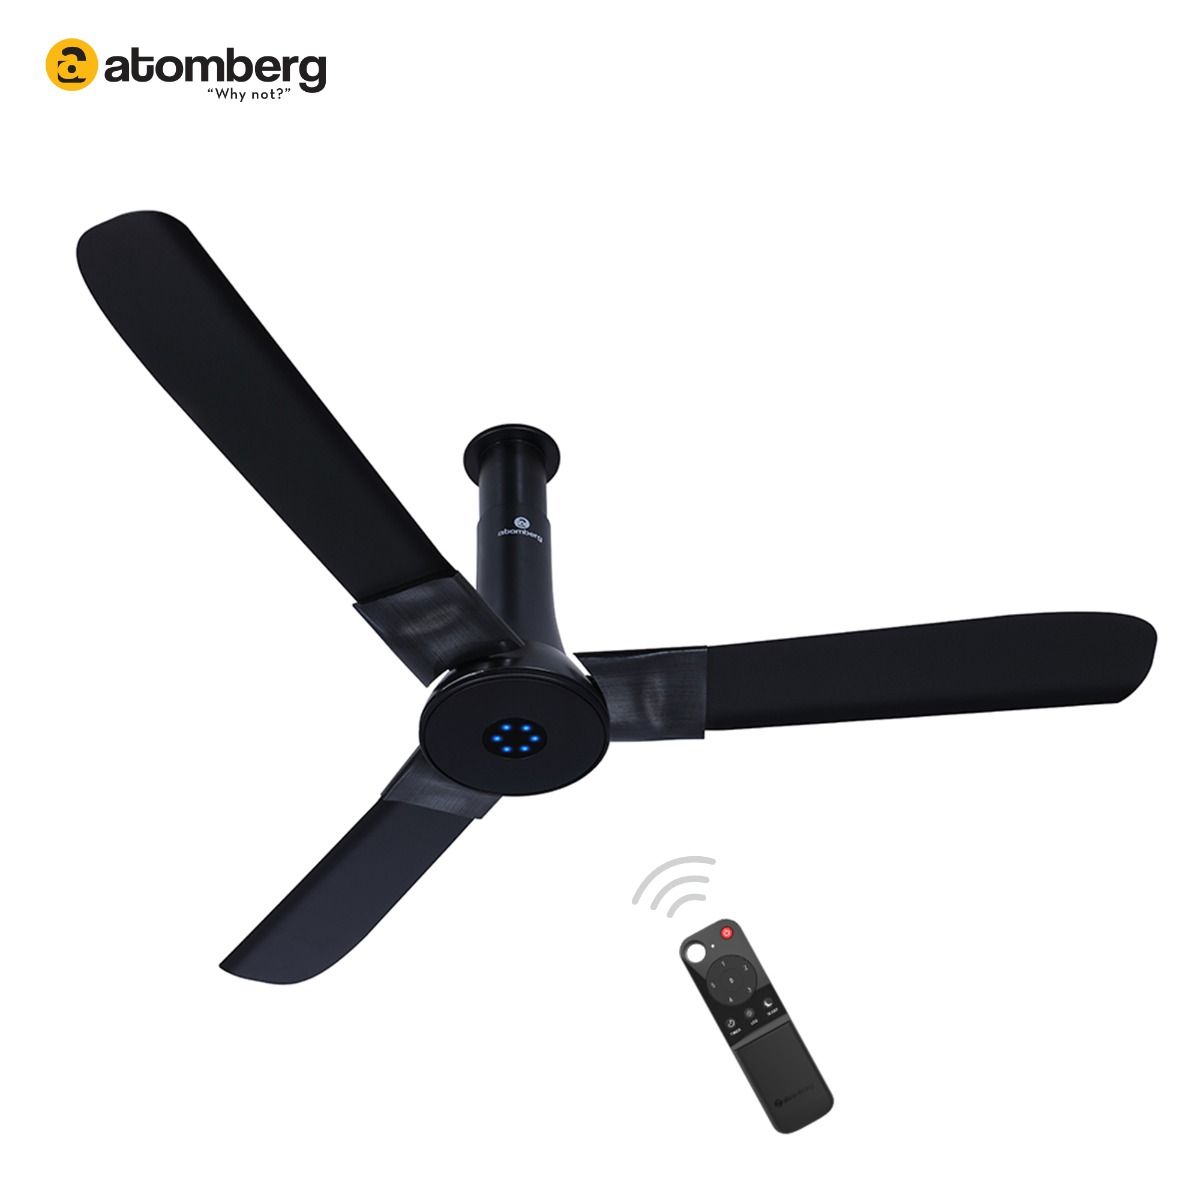 Buy bldc ceiling fan at best prices online in india